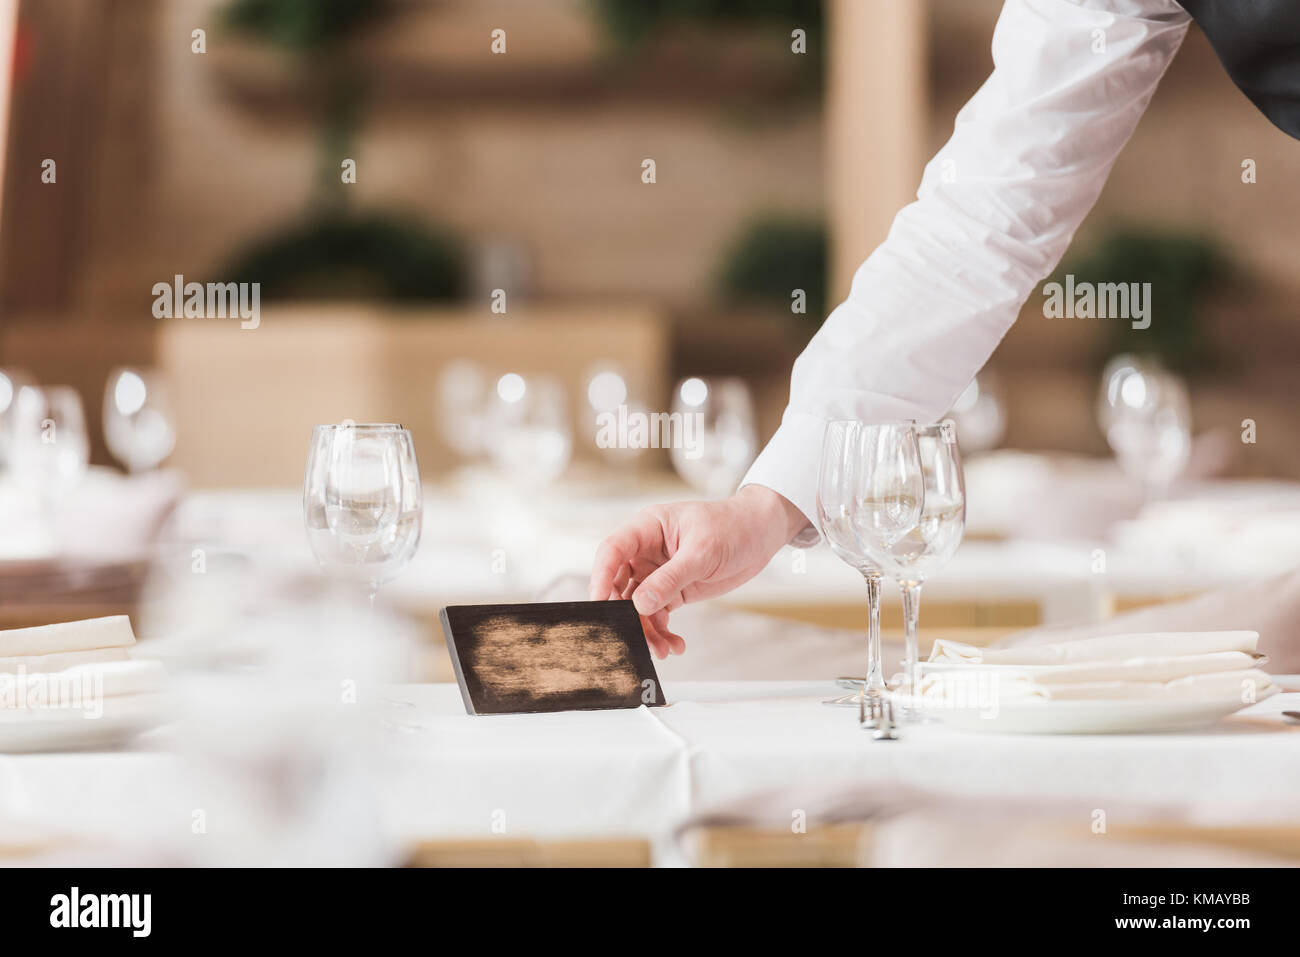 Waiter putting reserved sign Stock Photo